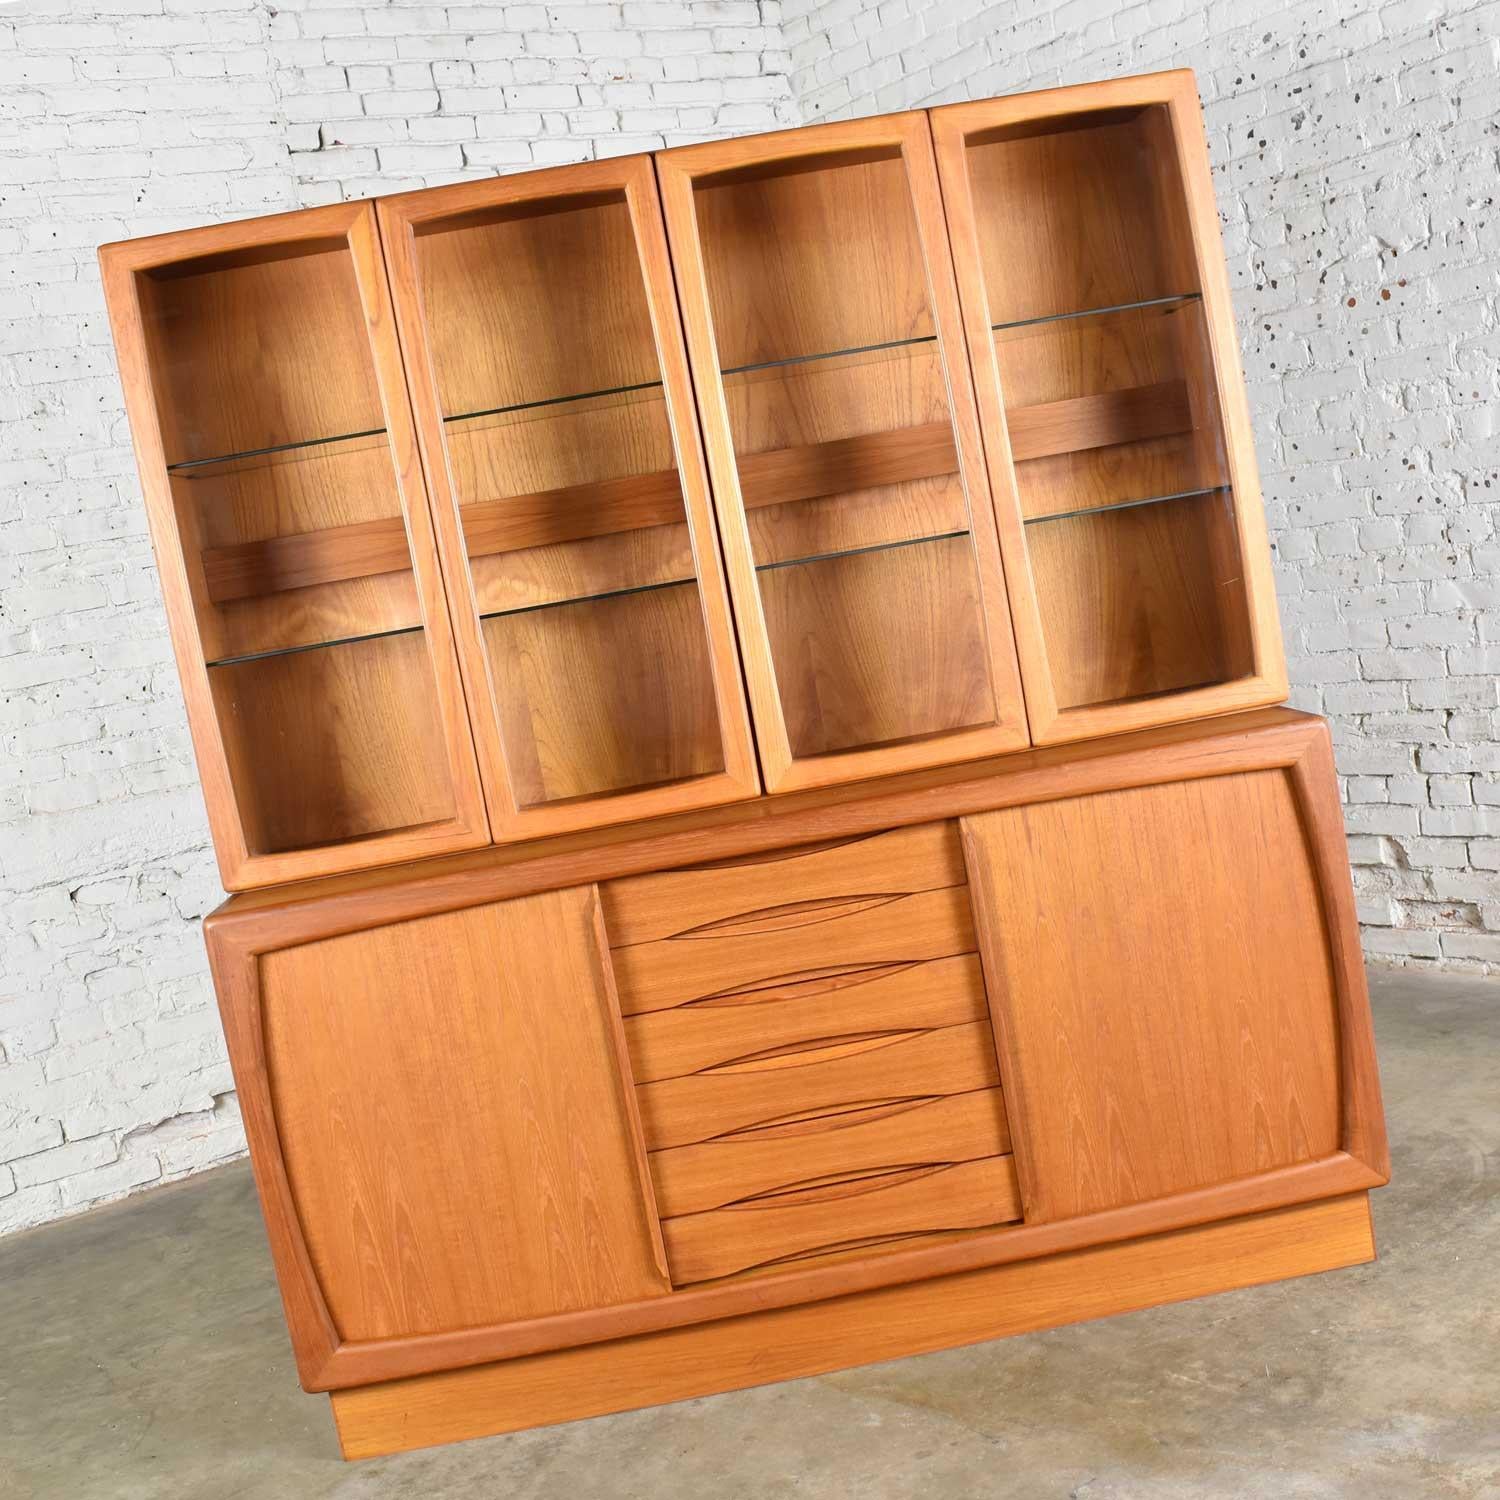 Handsome 2-piece Scandinavian Modern teak buffet with china hutch display cabinet top. This duo is attributed to Dyrlund. It is in fabulous vintage condition with no outstanding flaws that we have seen. Please see photos, circa mid-late 20th